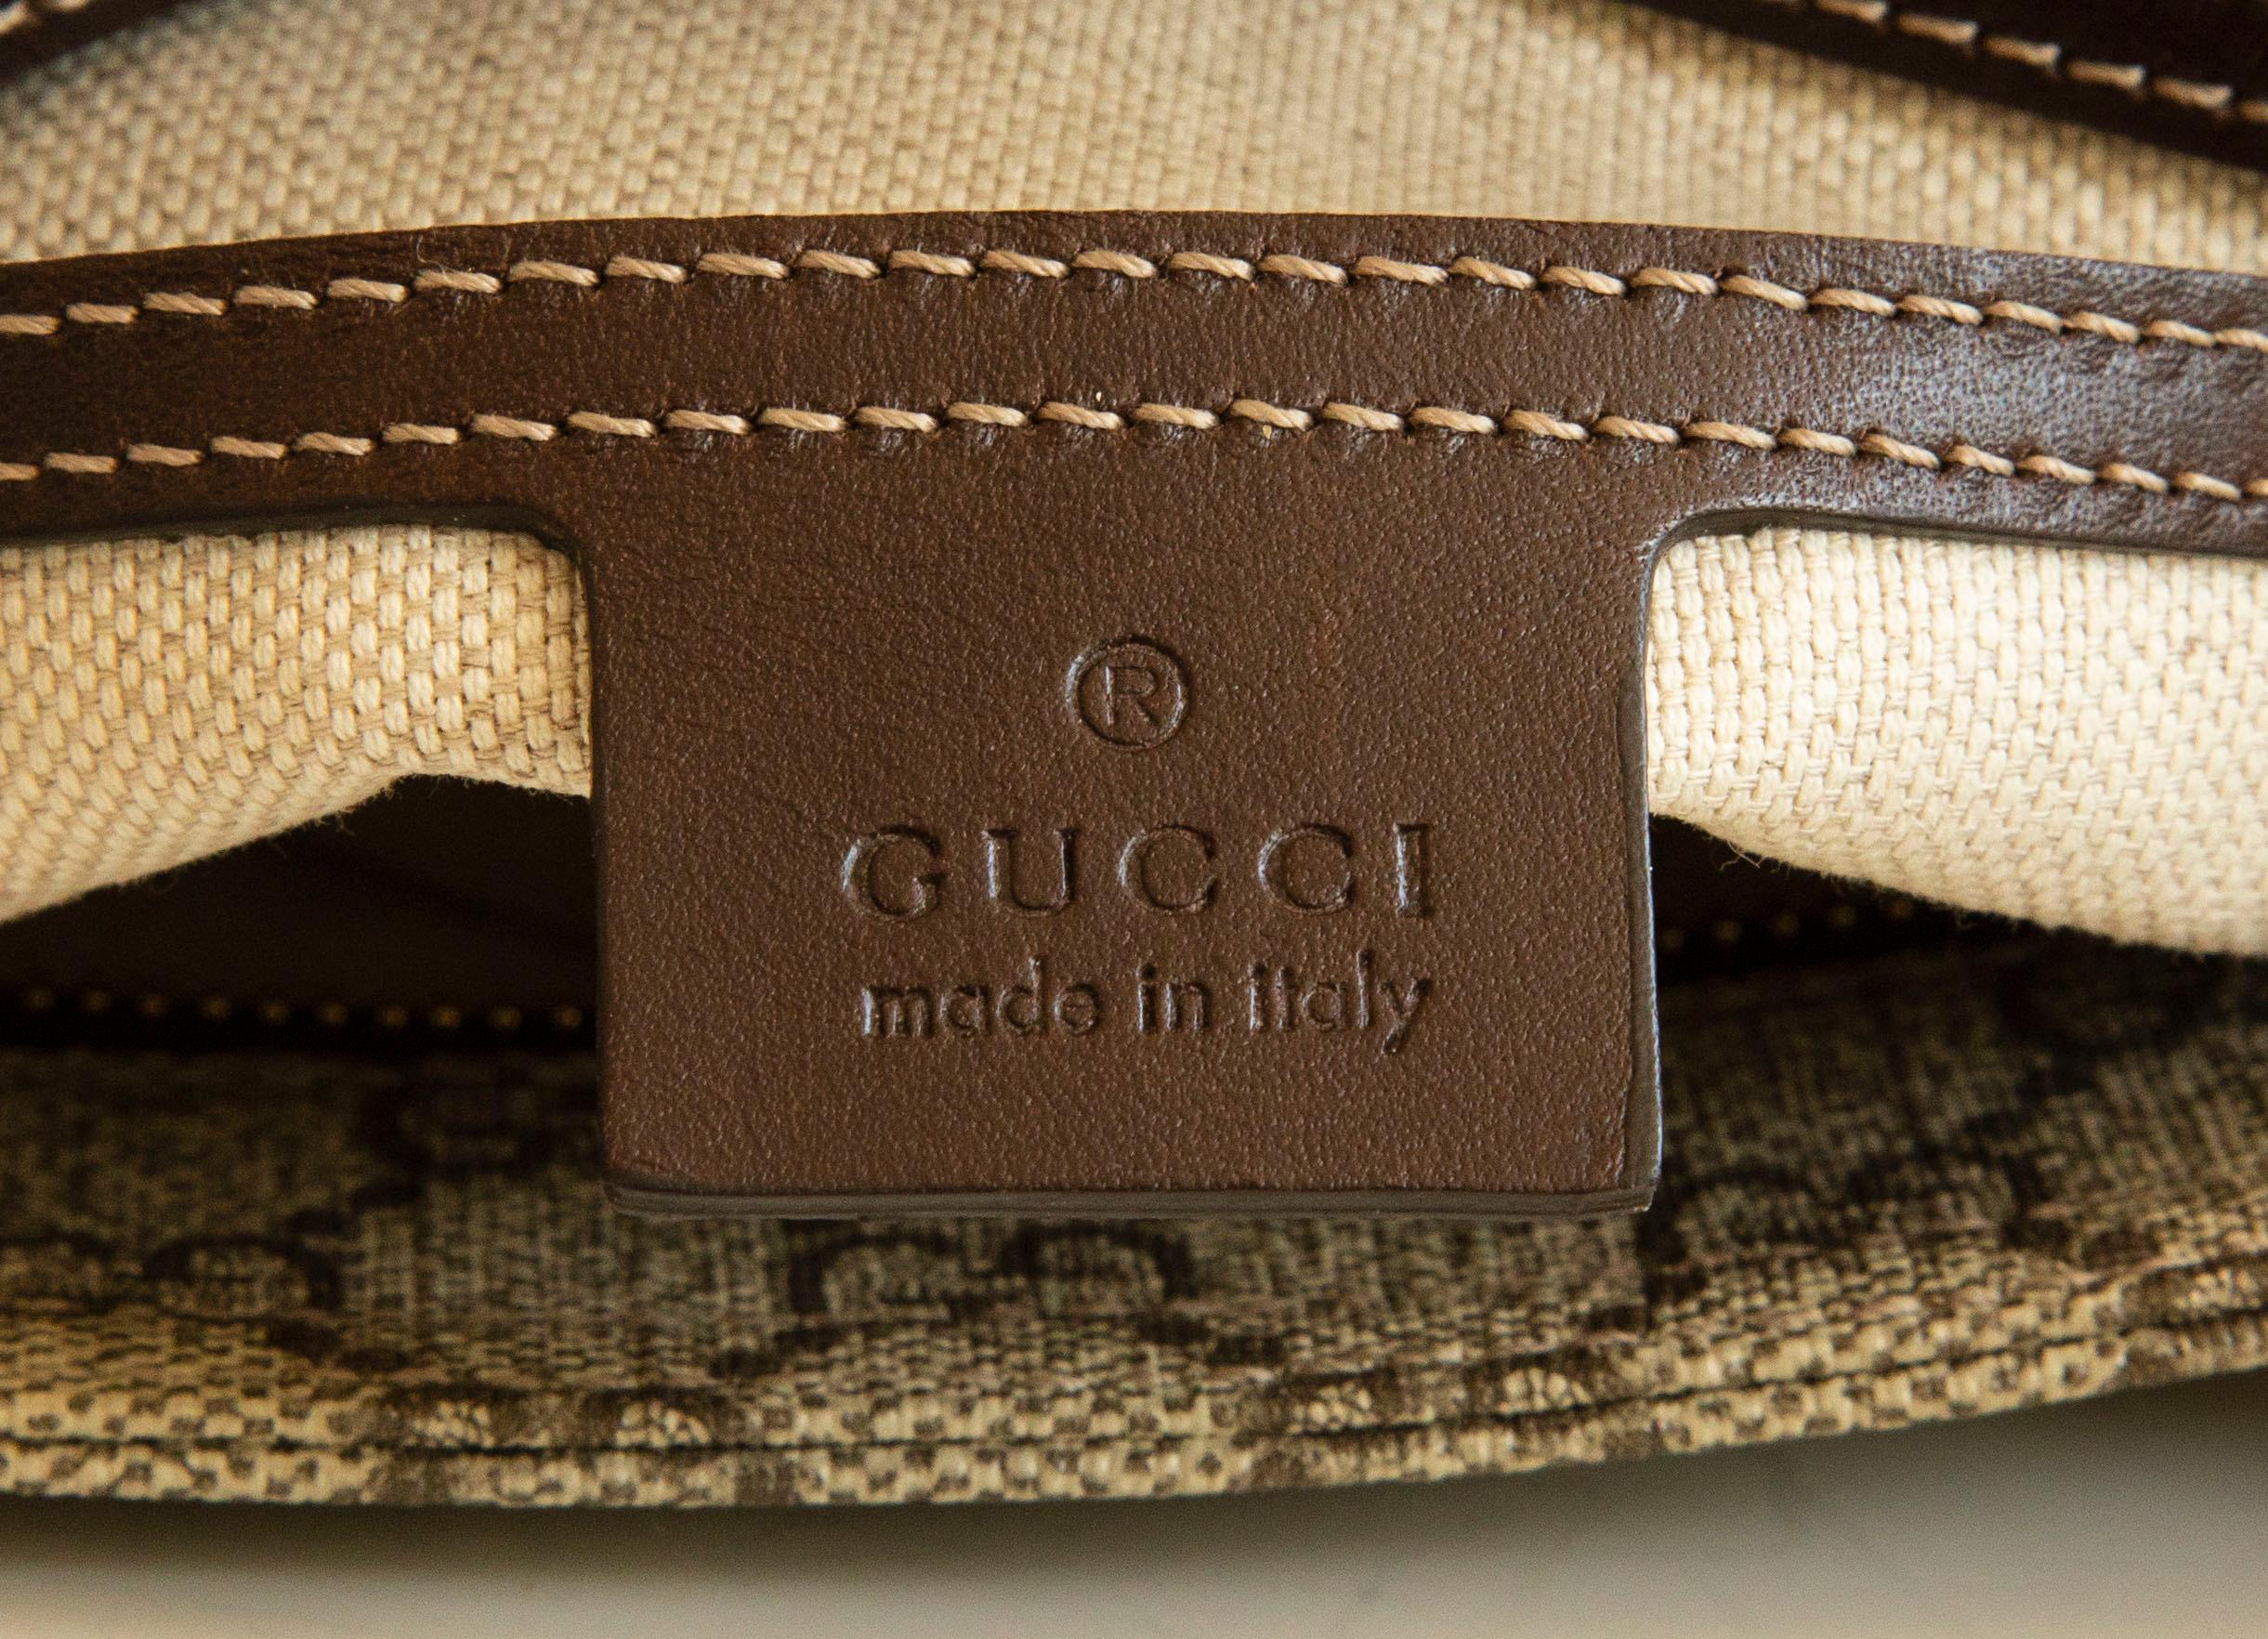 Gucci GG Supreme Messenger Bag in Coated Canvas and Brown Finish For Sale 6